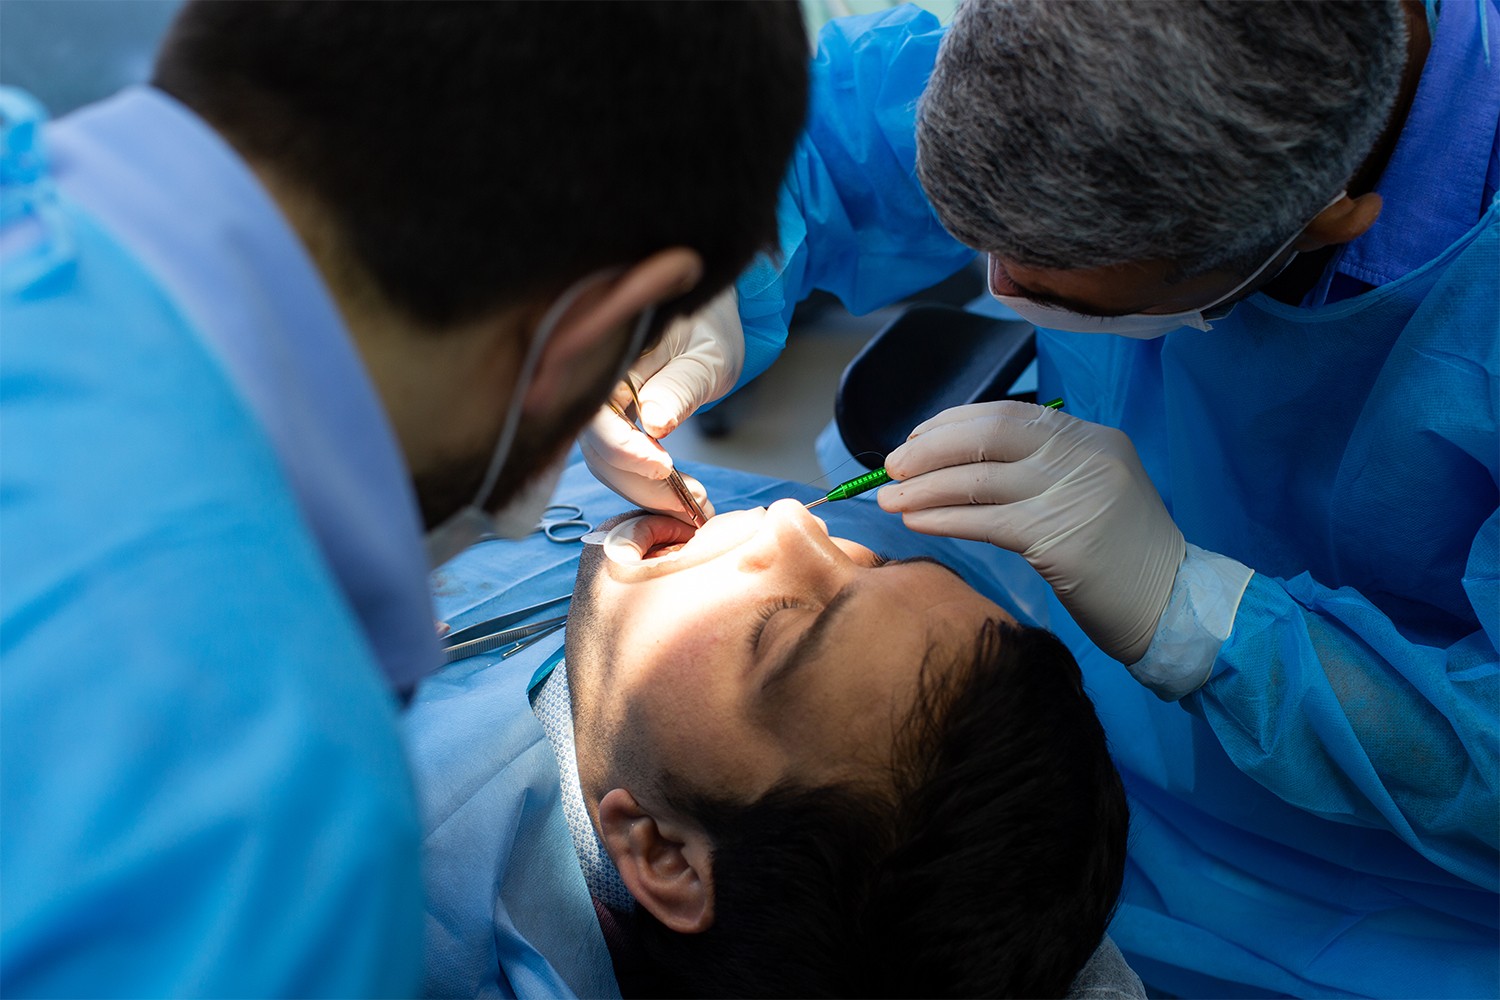 Endodontic emergency cases and management